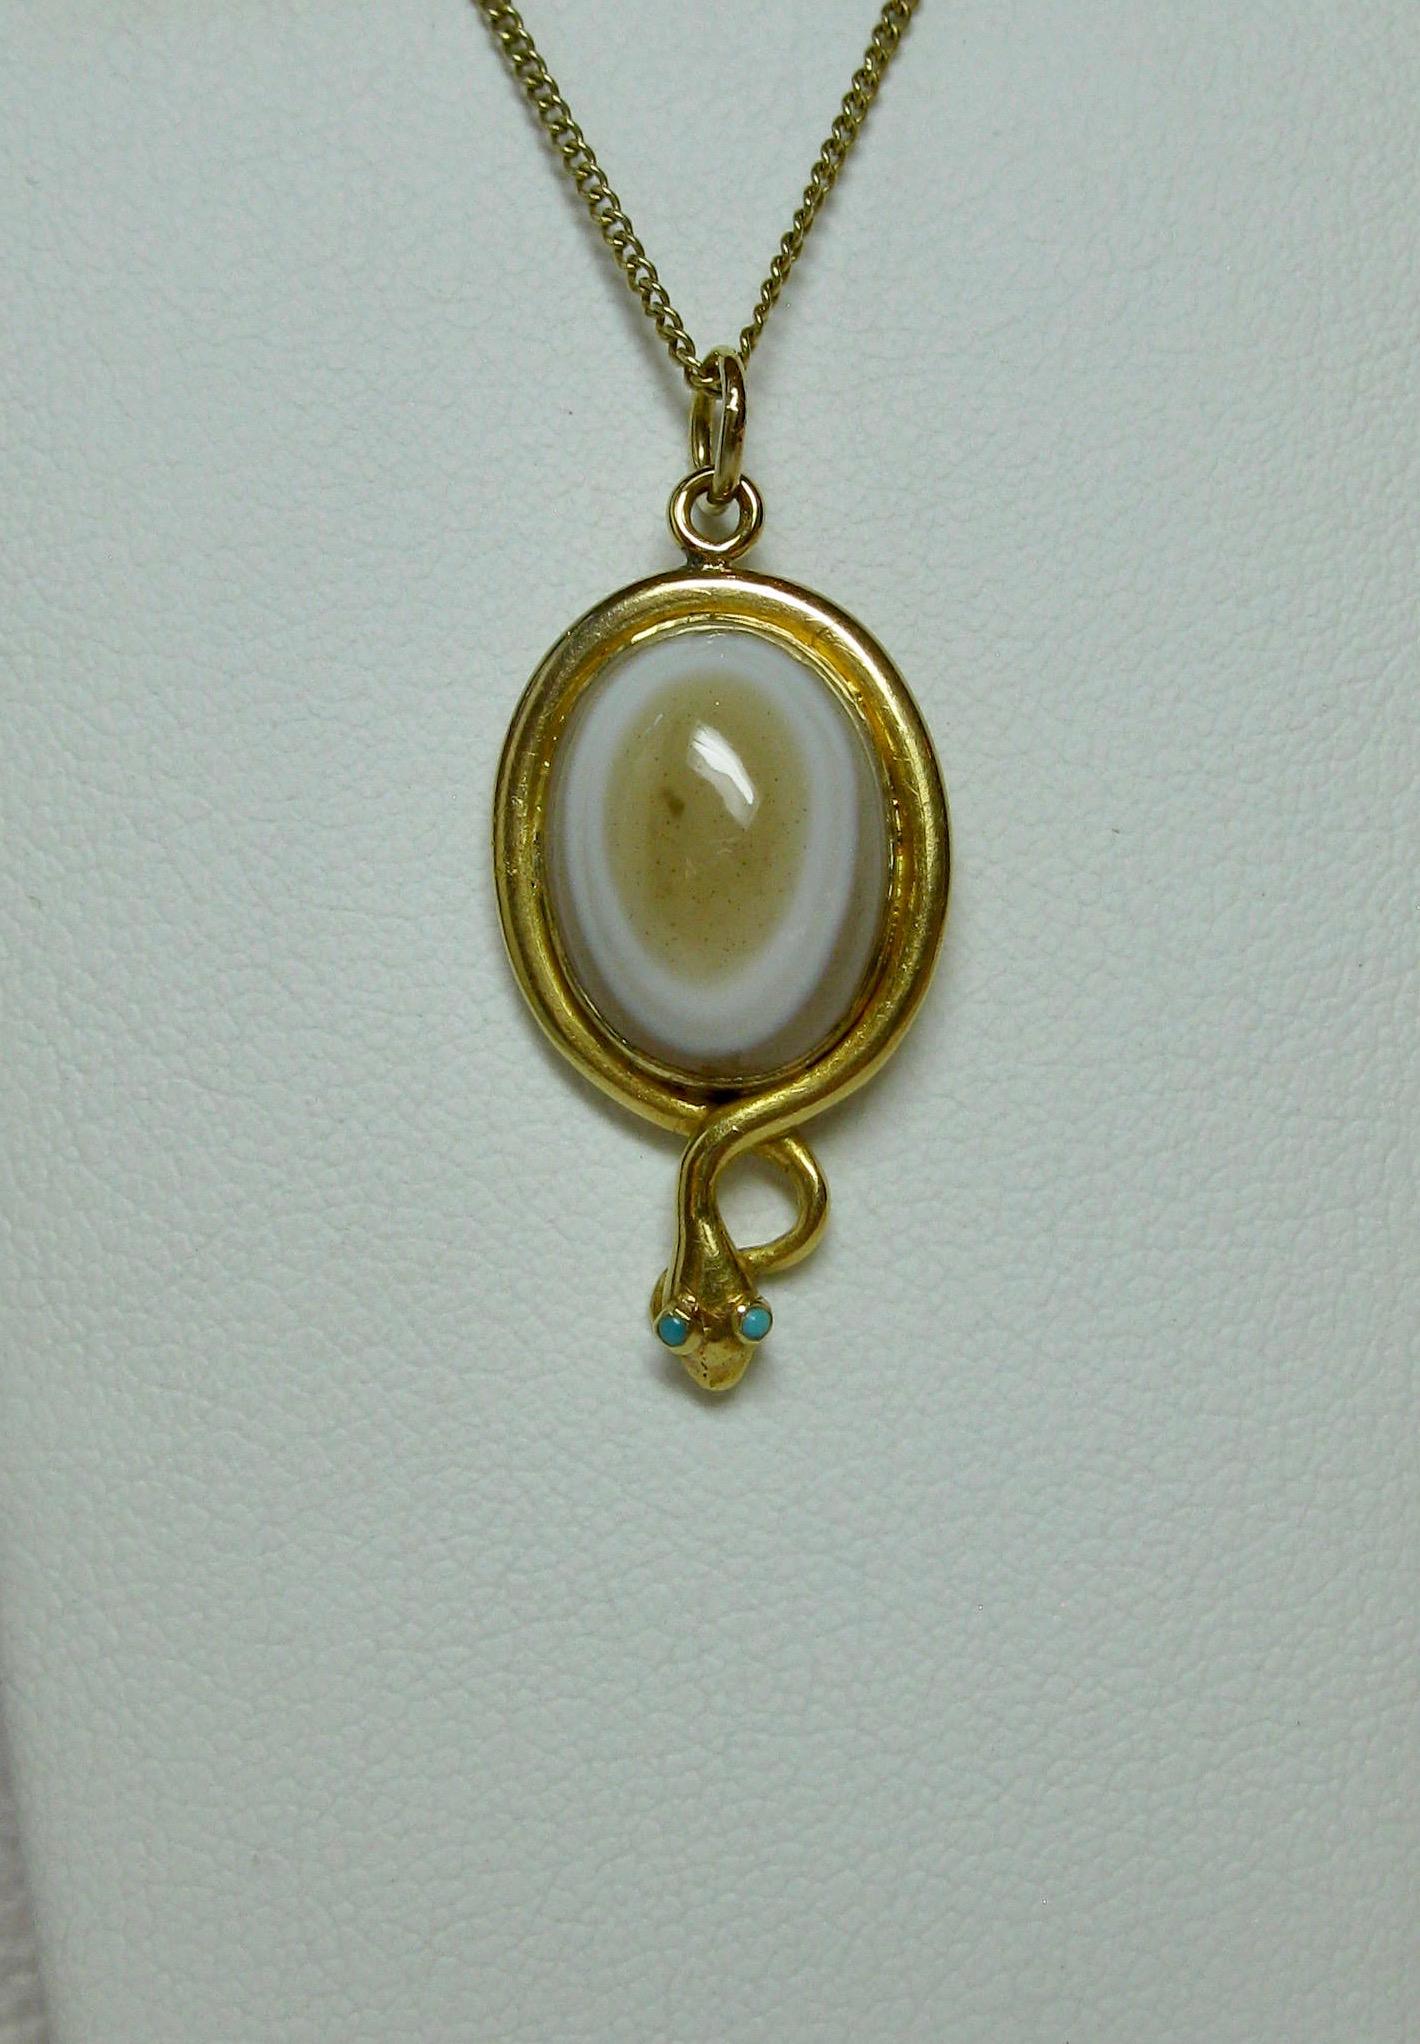 A rare antique Victorian Snake Pendant depicting a snake or serpent wrapped around an egg.  The snake beautifully created in 18 Karat gold.  The egg a gorgeous Banded Agate.  The snake's eyes two Persian Turquoise cabochons. The snake pendant dates